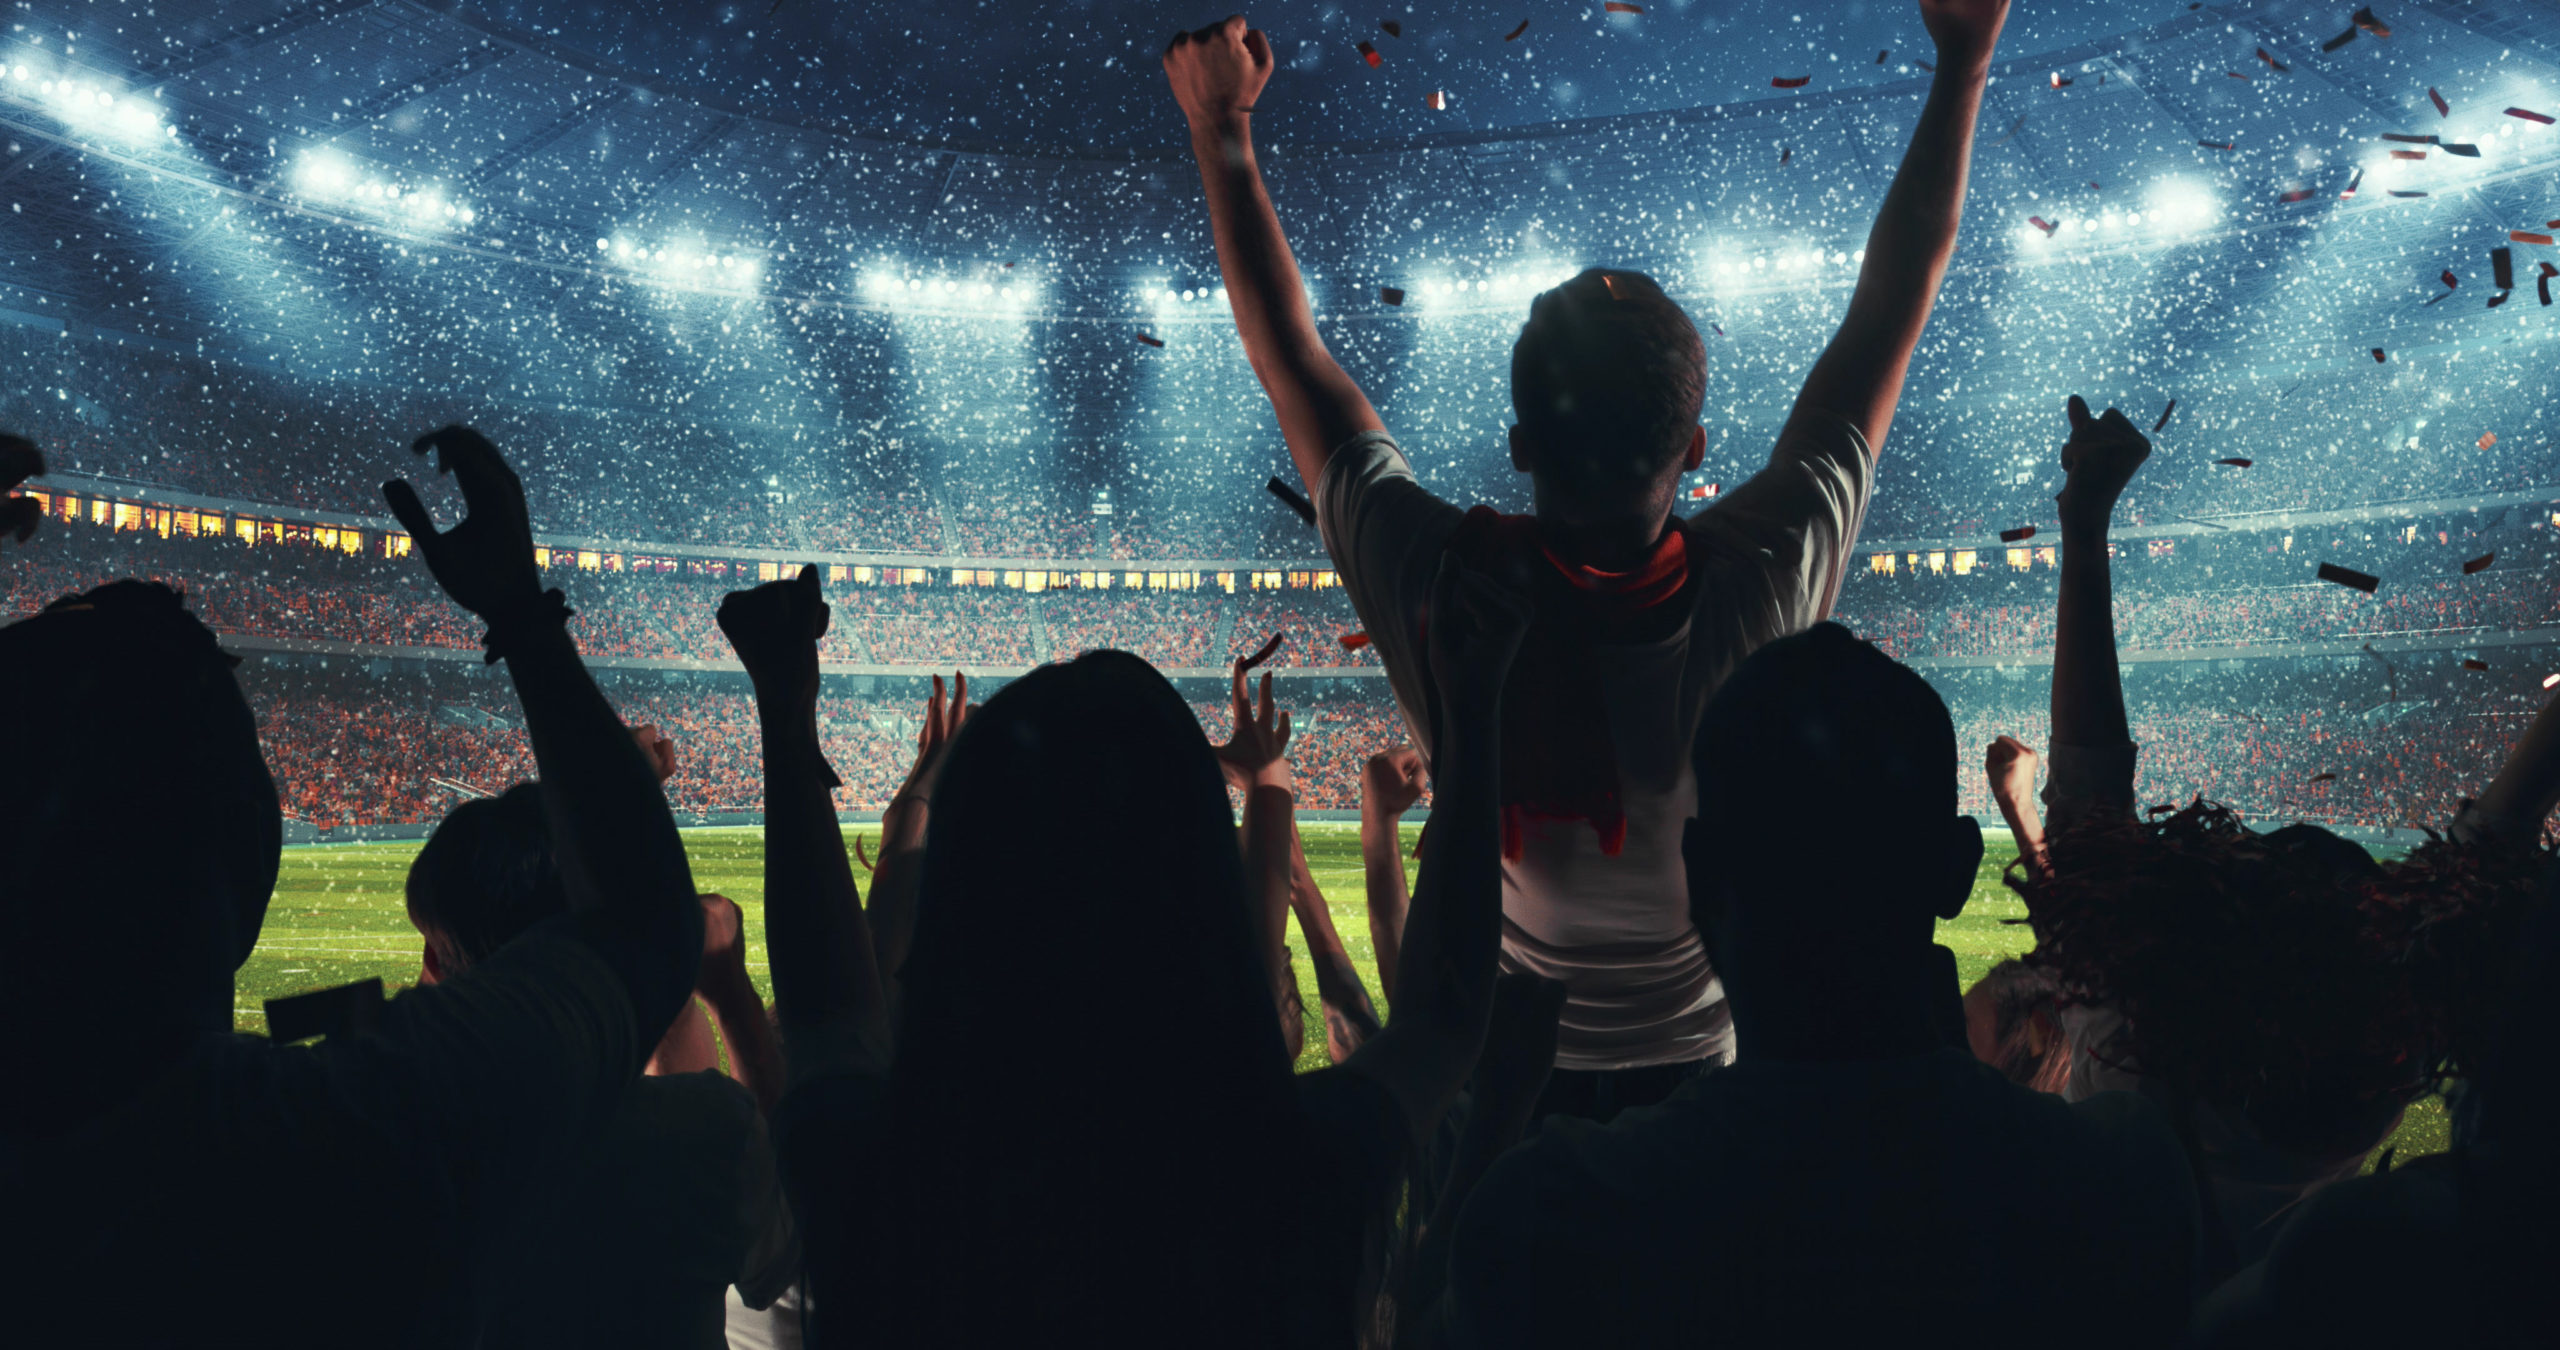 The 2022 World Cup is inspiring stadium innovation with video intelligence solutions that enhance operations and elevate the fan experience.